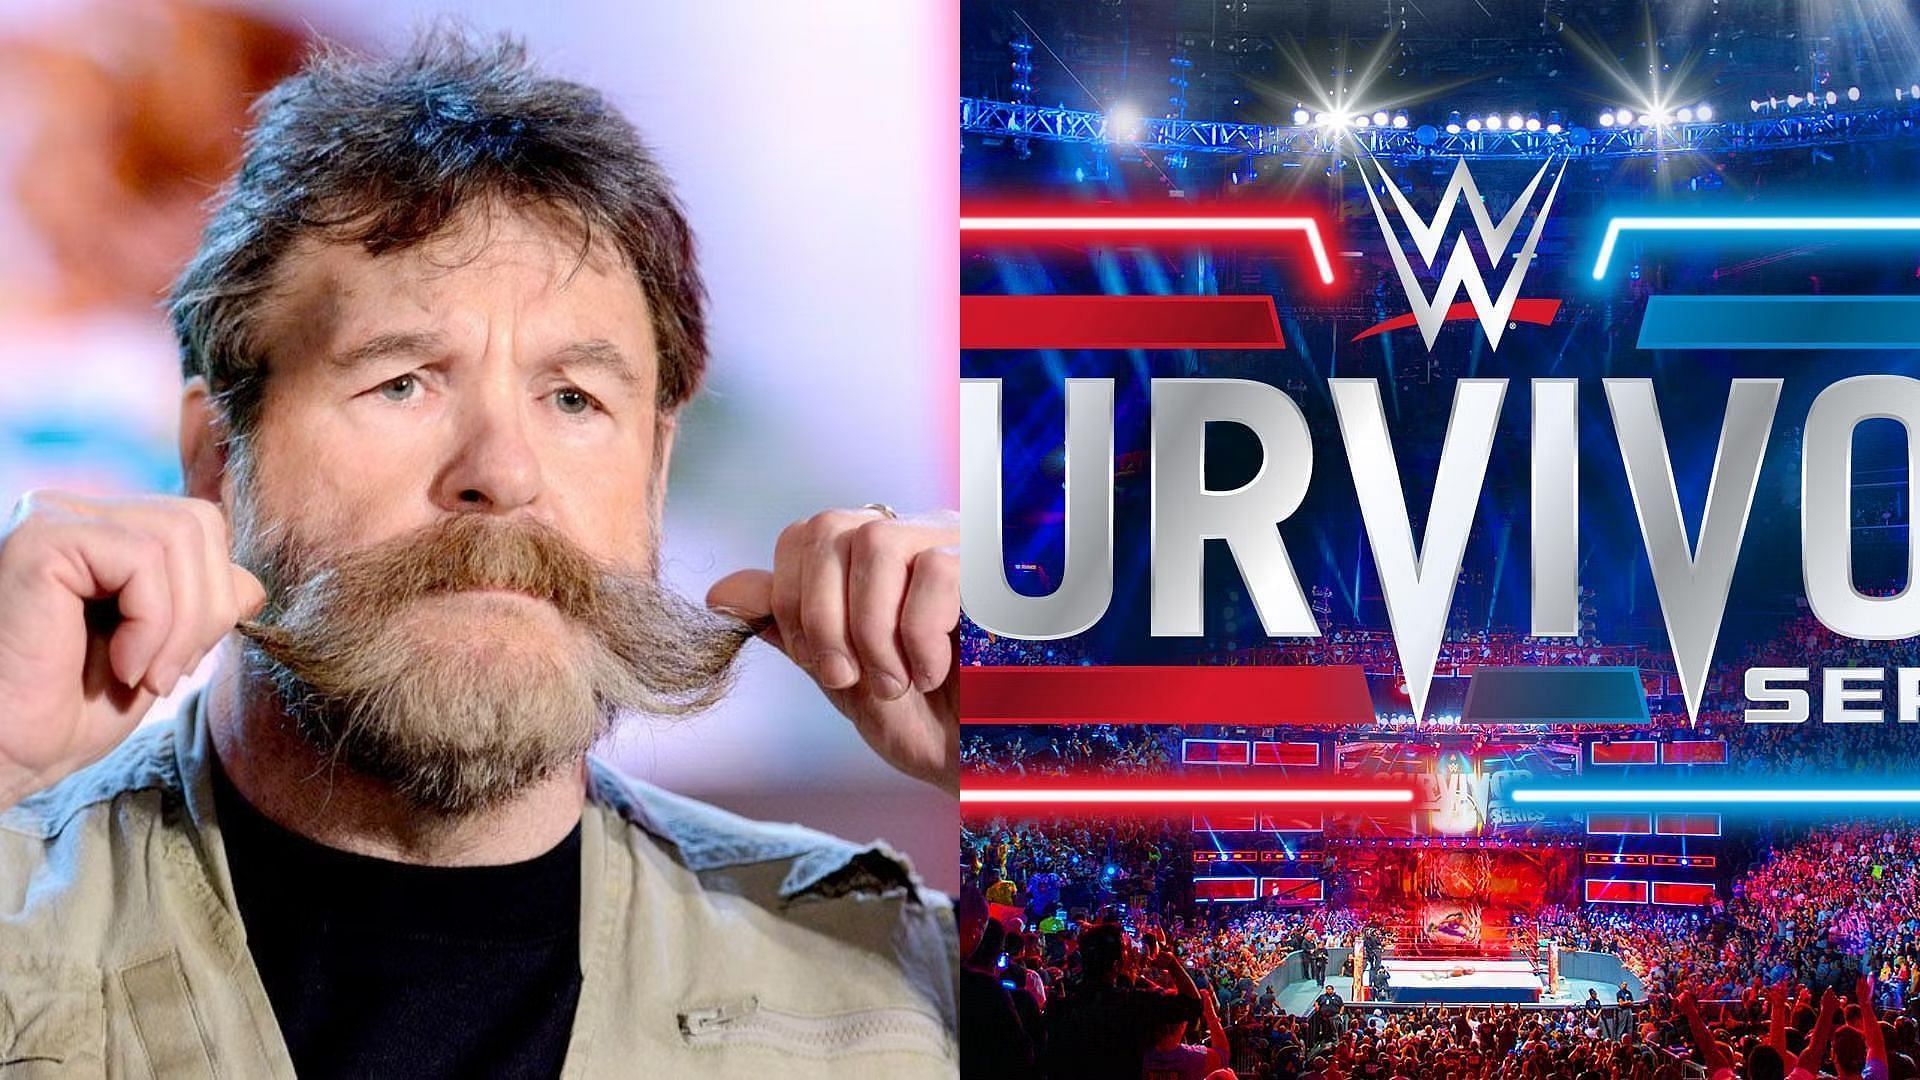 Dutch Mantell shared his prediction for WWE Survivor Series